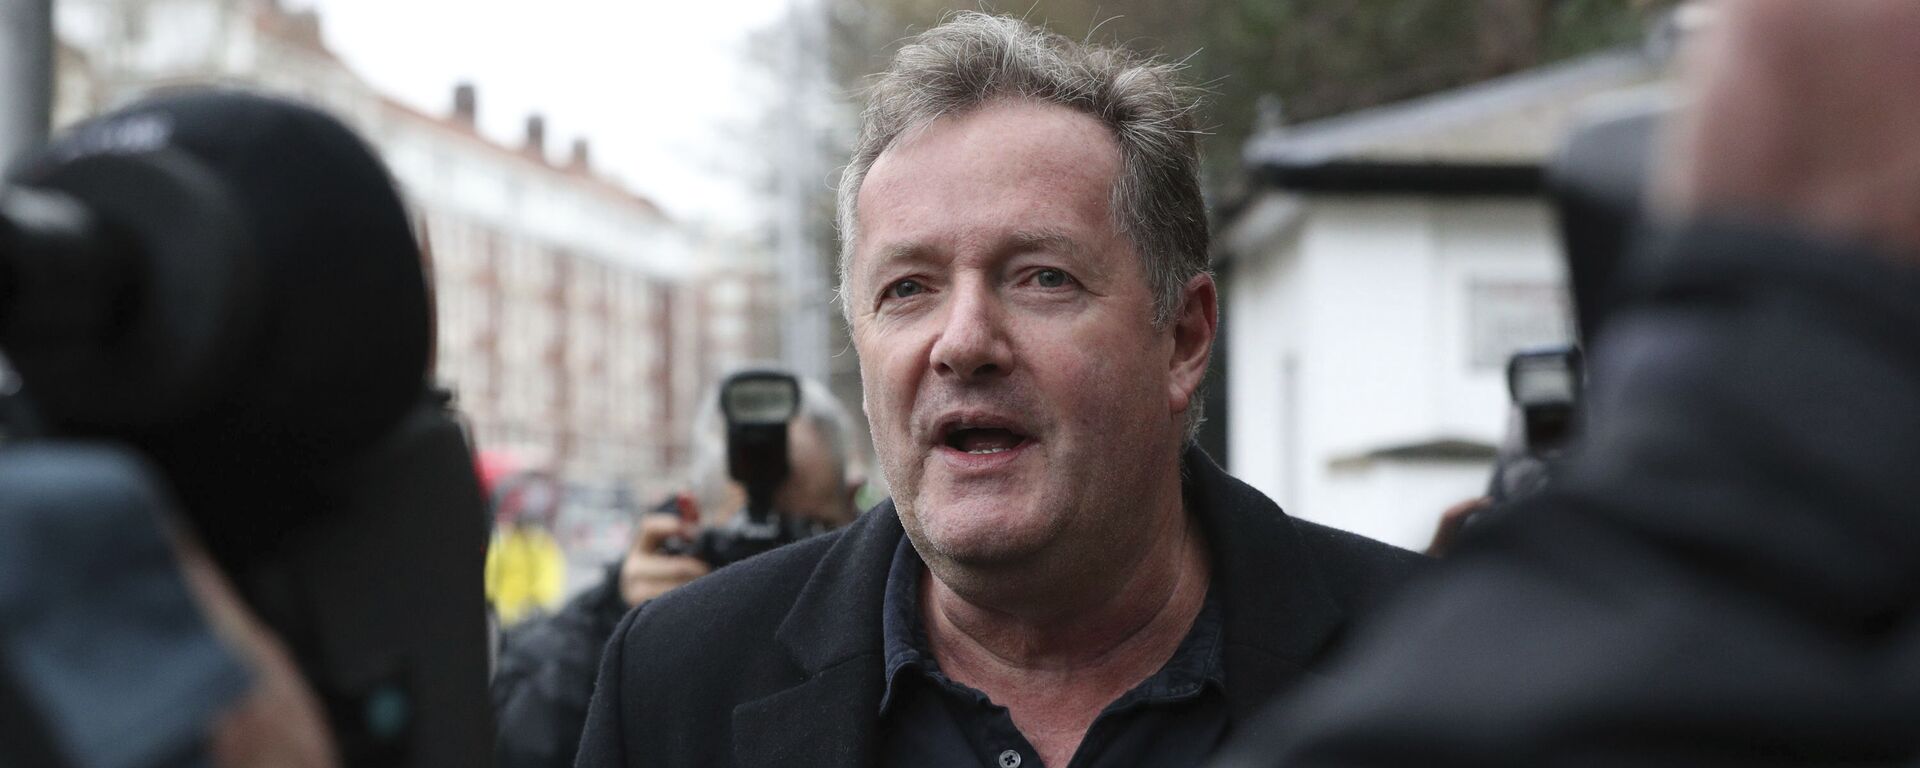 British television host Piers Morgan speaks to reporters outside his home in Kensington, central London, Wednesday 10 March 2021. - Sputnik International, 1920, 08.04.2021